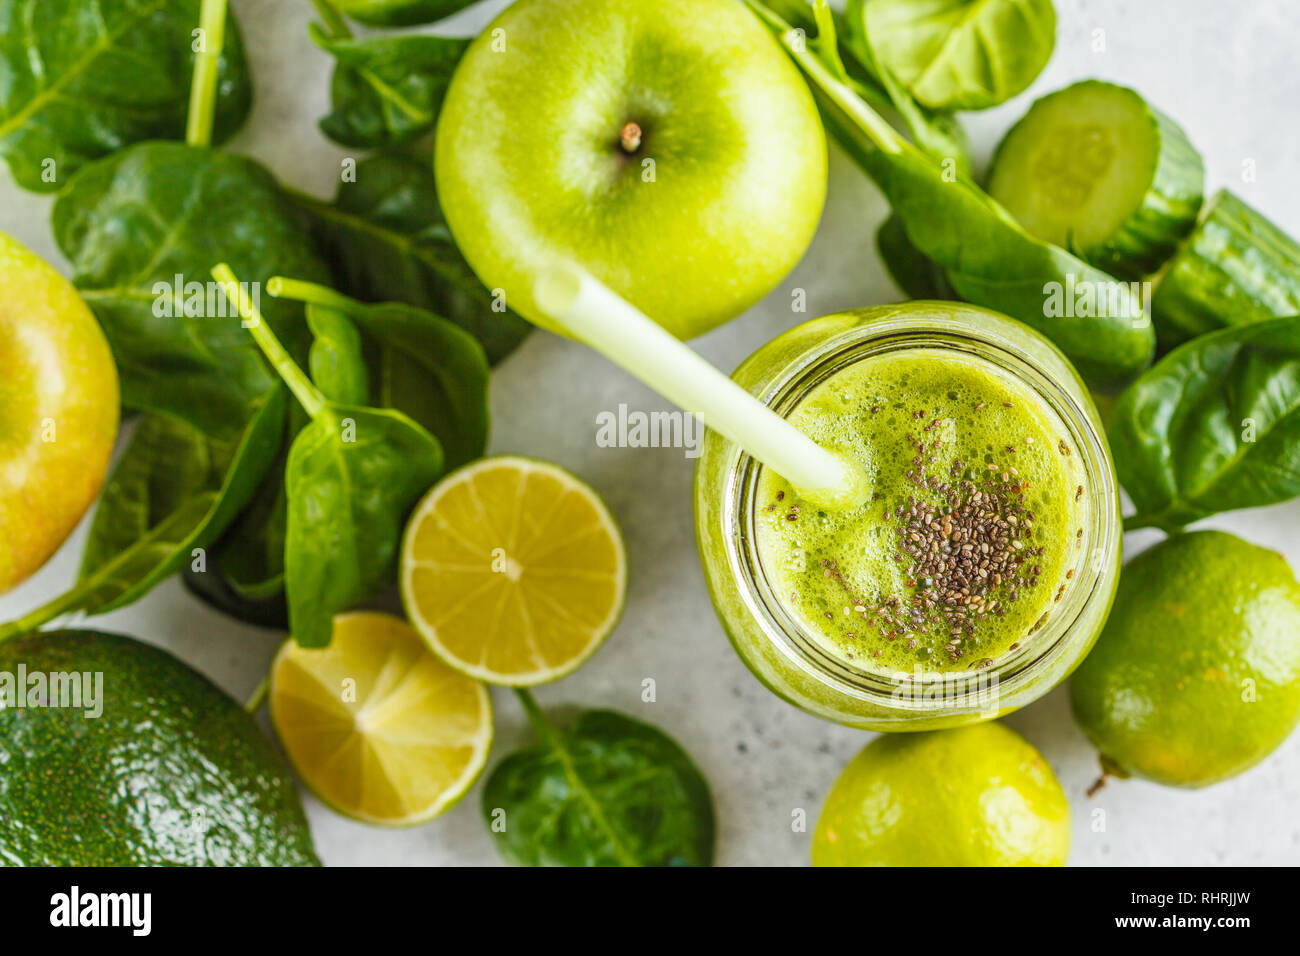 Green healthy smoothie (juice) in the jar. Apple, spinach, cucumber smoothie on a white background with the ingredients. Stock Photo